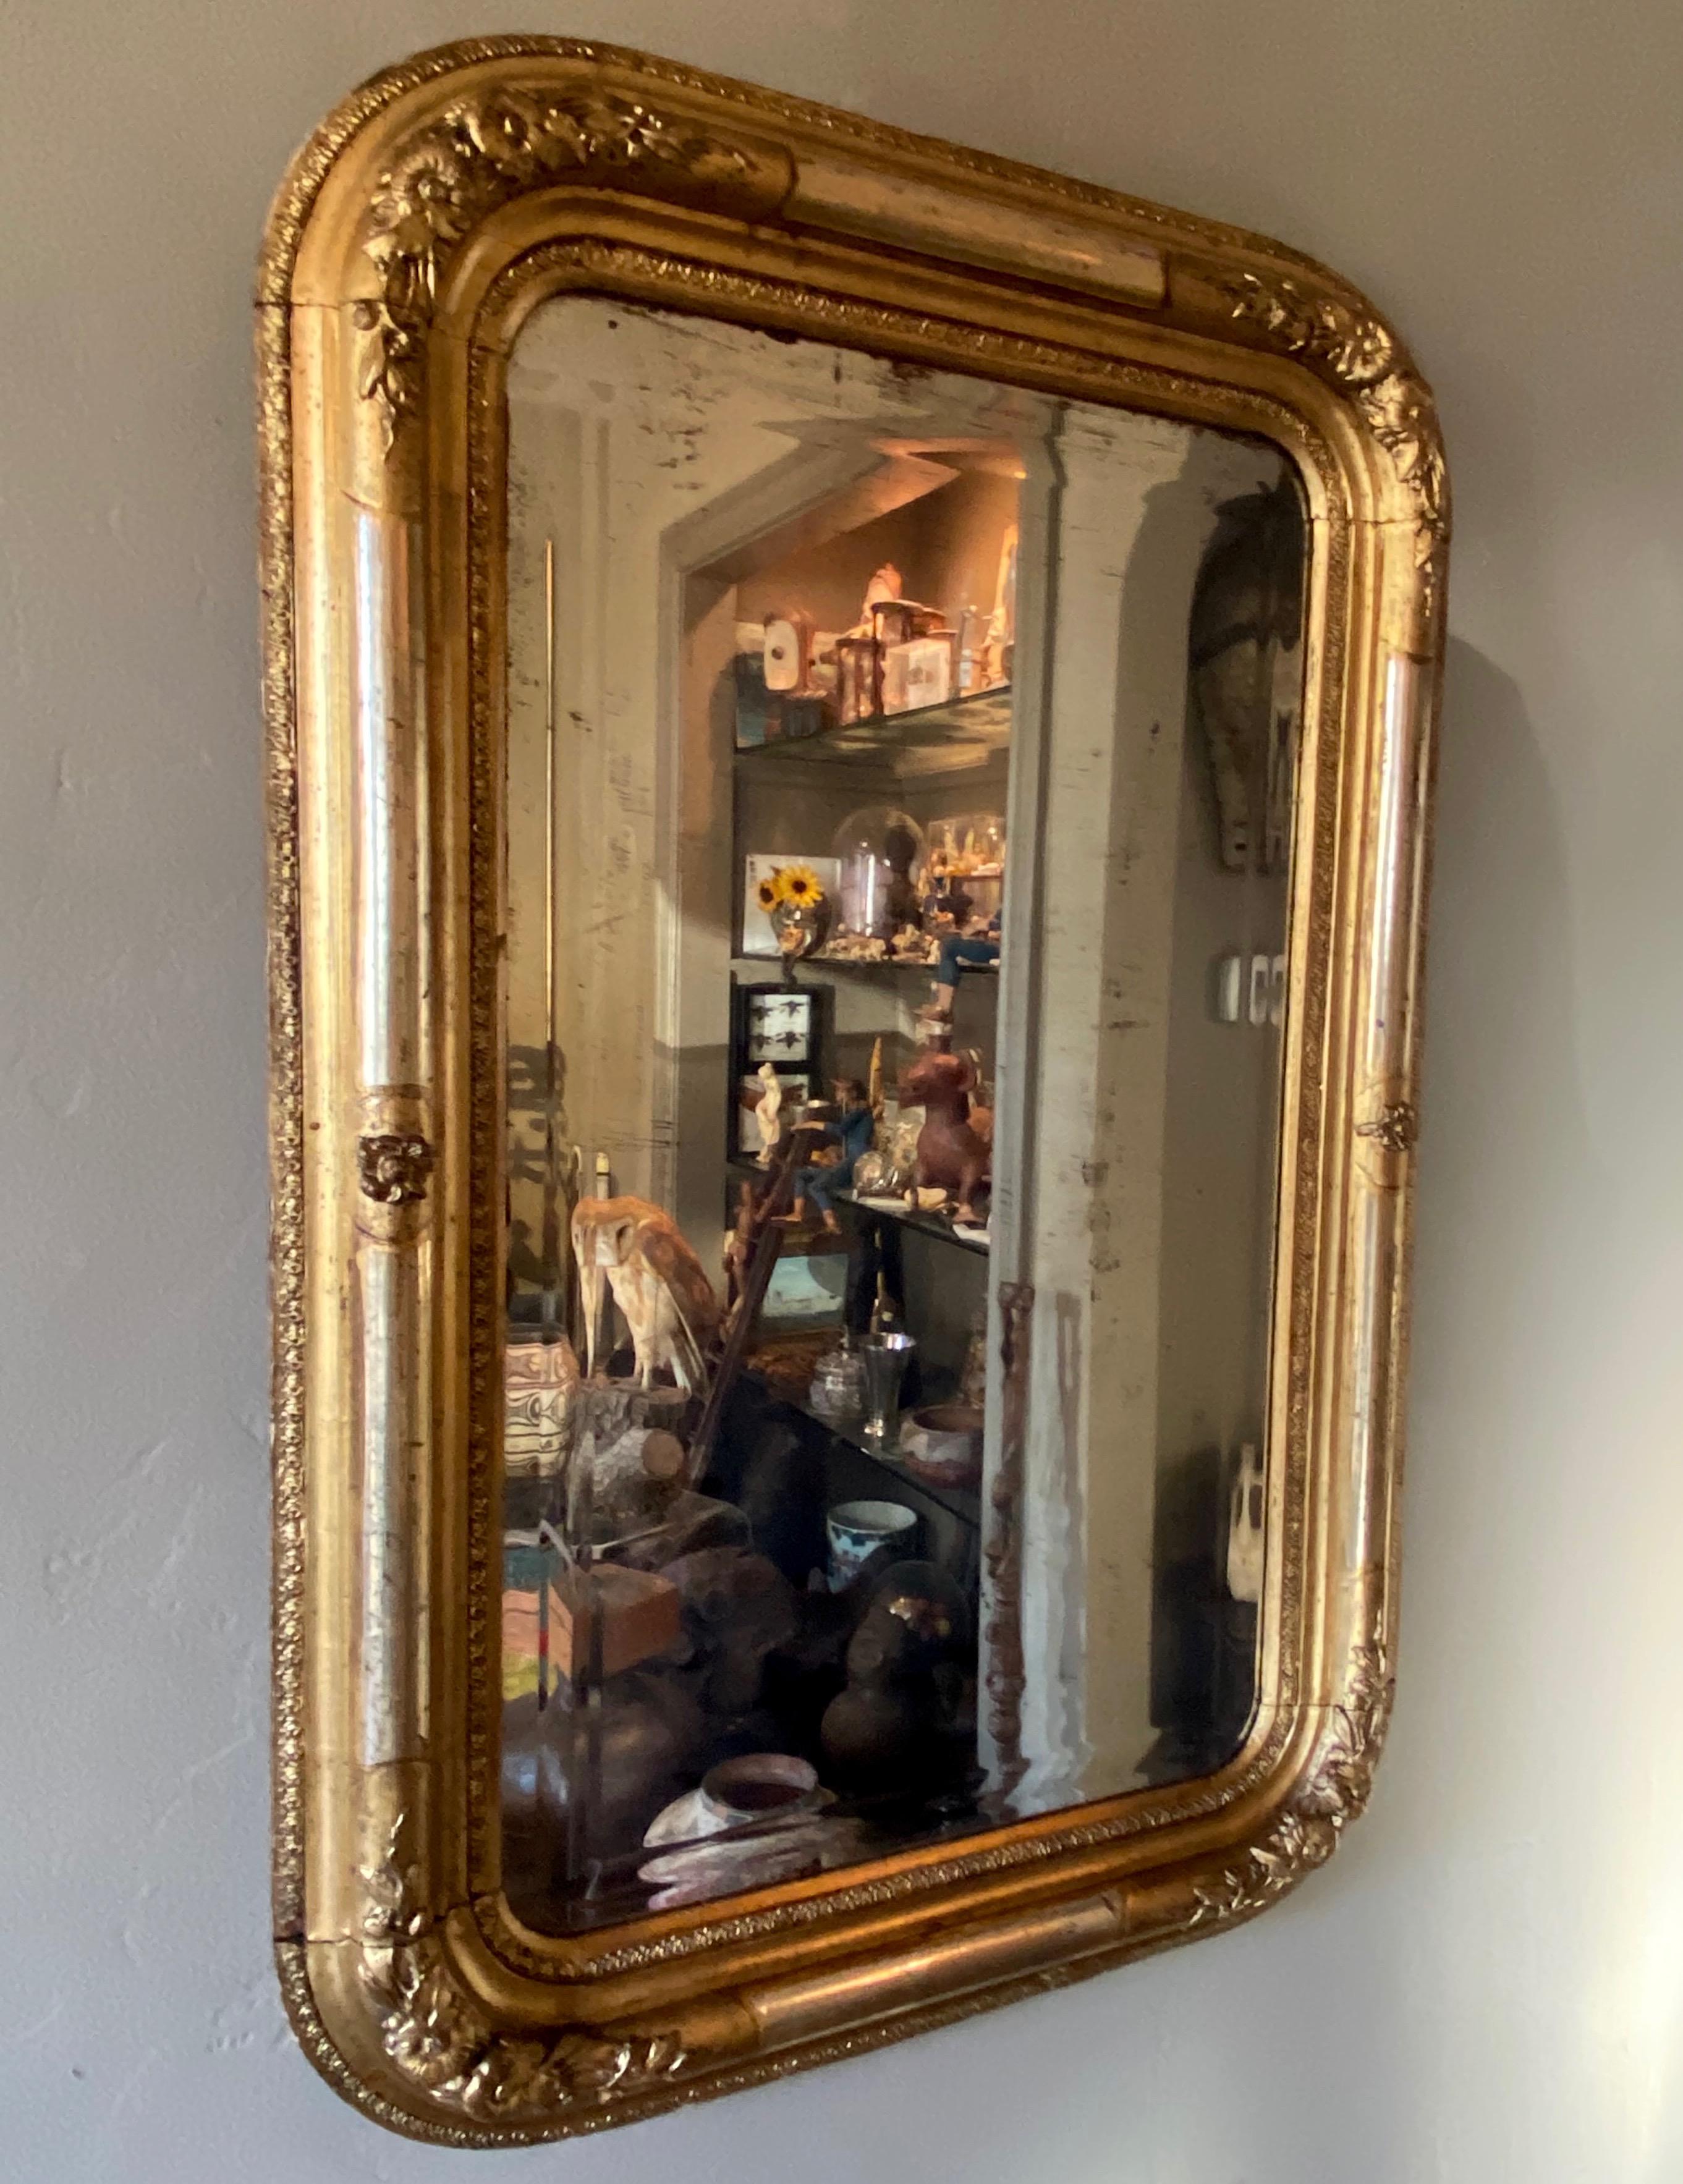 An unusual smaller size Louis Philippe neoclassical style mirror, having gold gilded frame with silver gilt accent and floral decoration at the rounded corners. Wonderful original condition, with original aged beveled mirror.
Easy to use size in